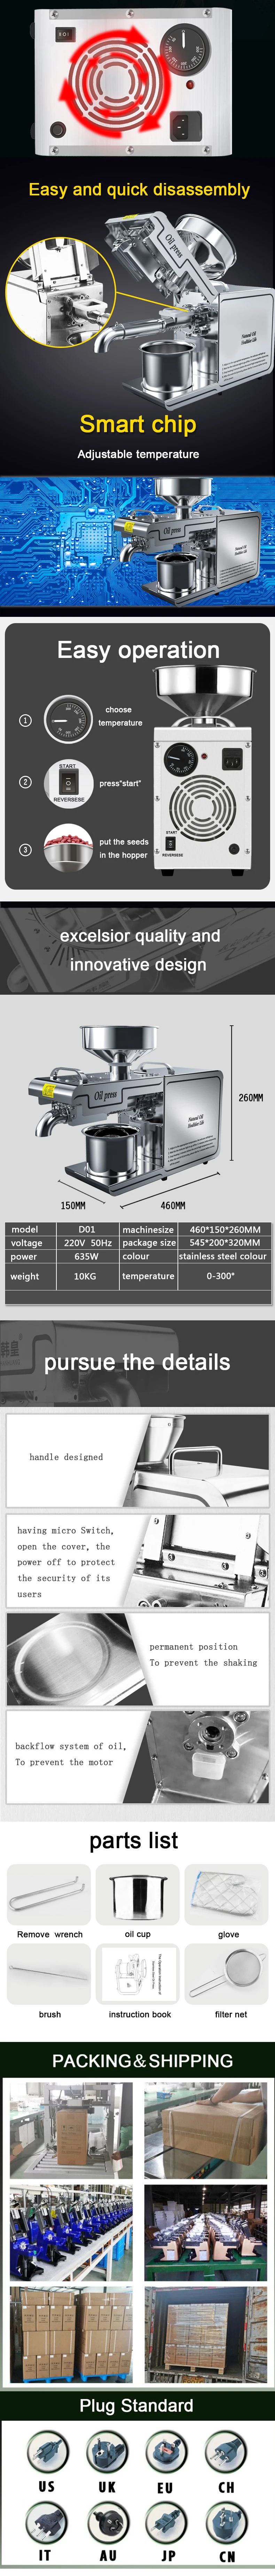 D01 stainless steel oil press with controllable temperature